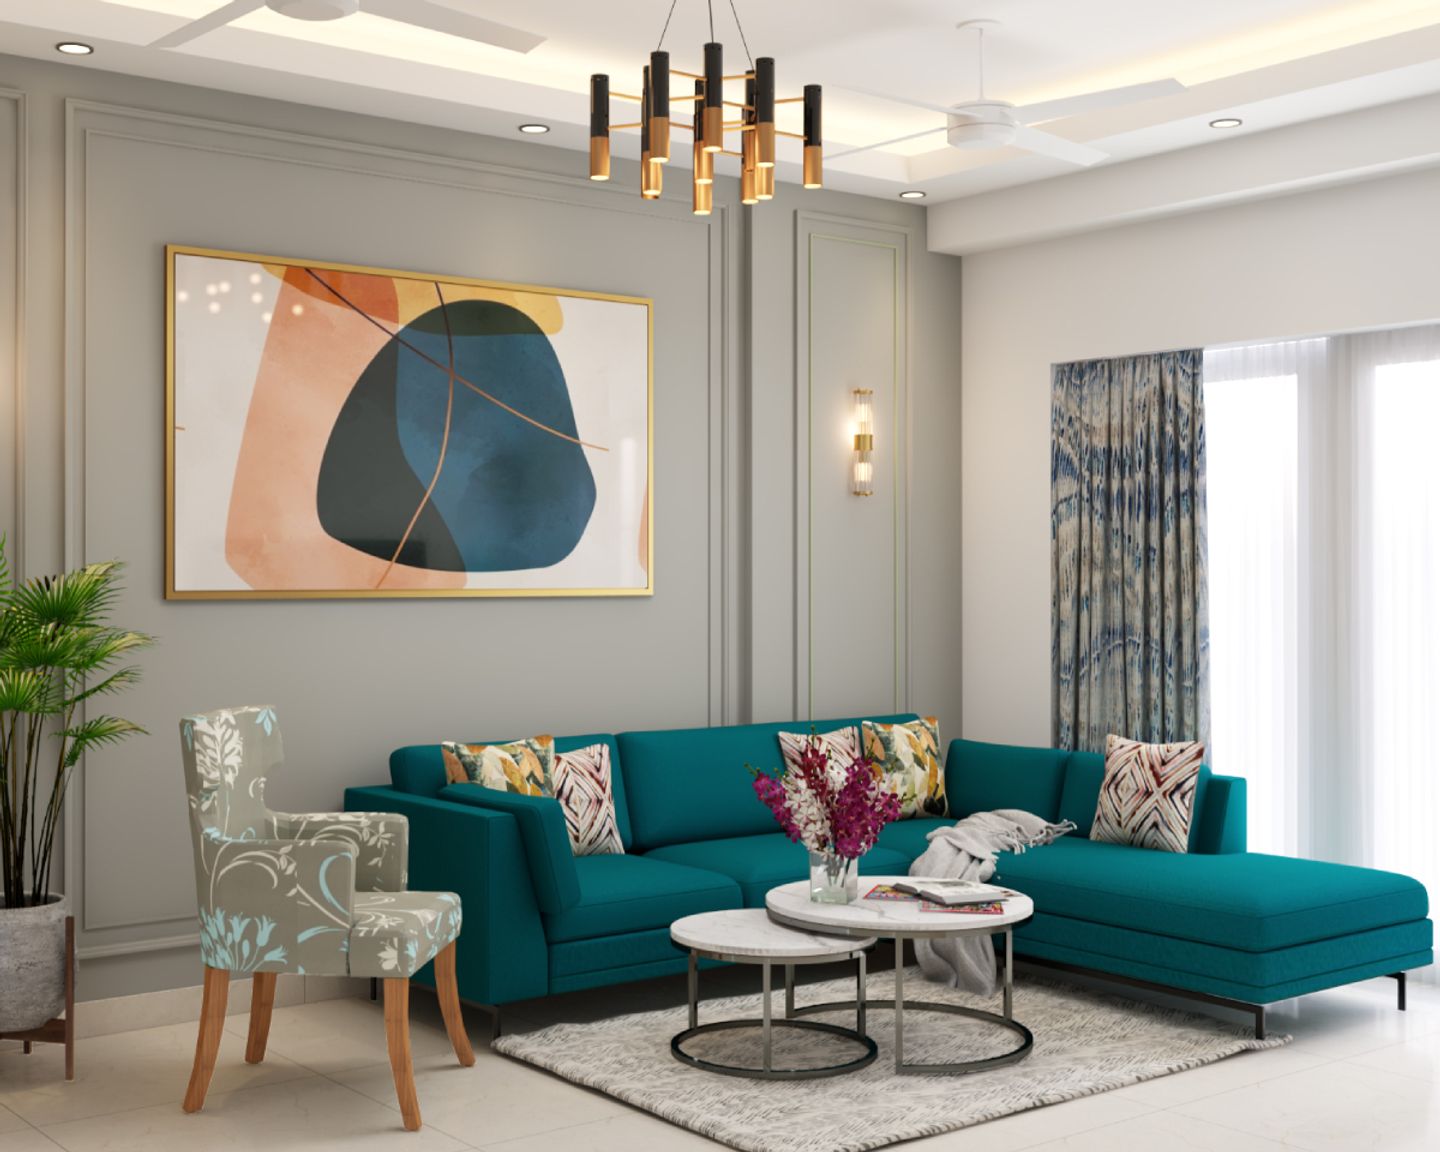 Living Room Design A Teal Blue Sofa And A Single-Seater Sofa With Floral Upholstery - Livspace